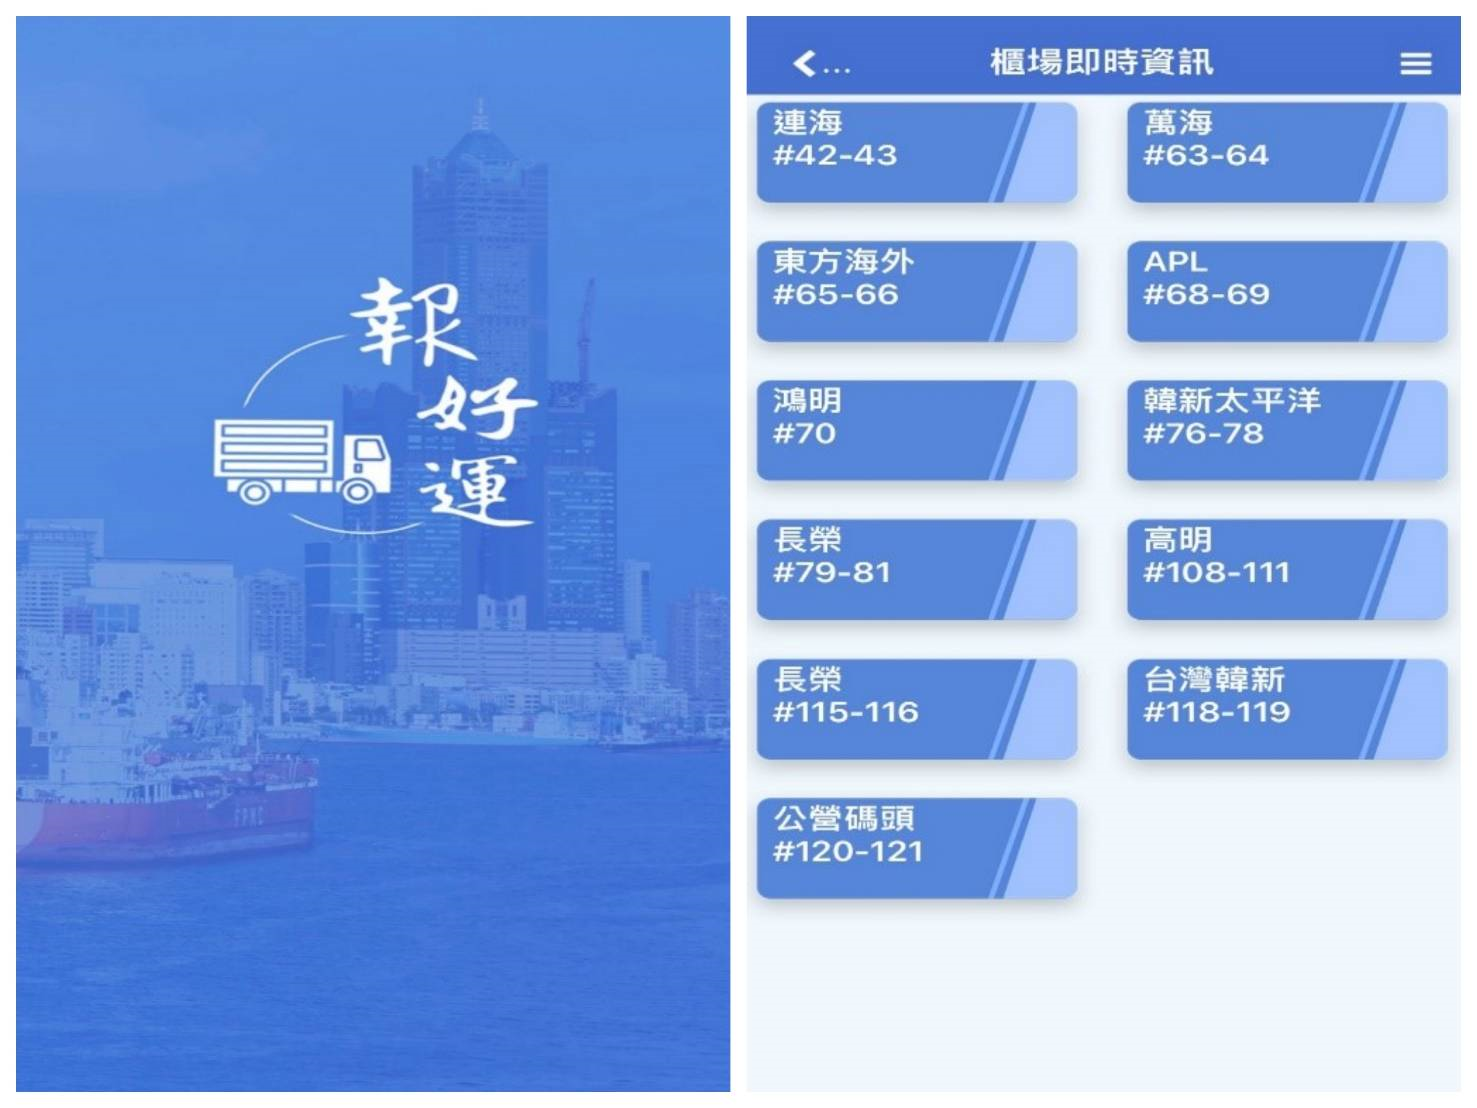 Screen view of the CTSS mobile app